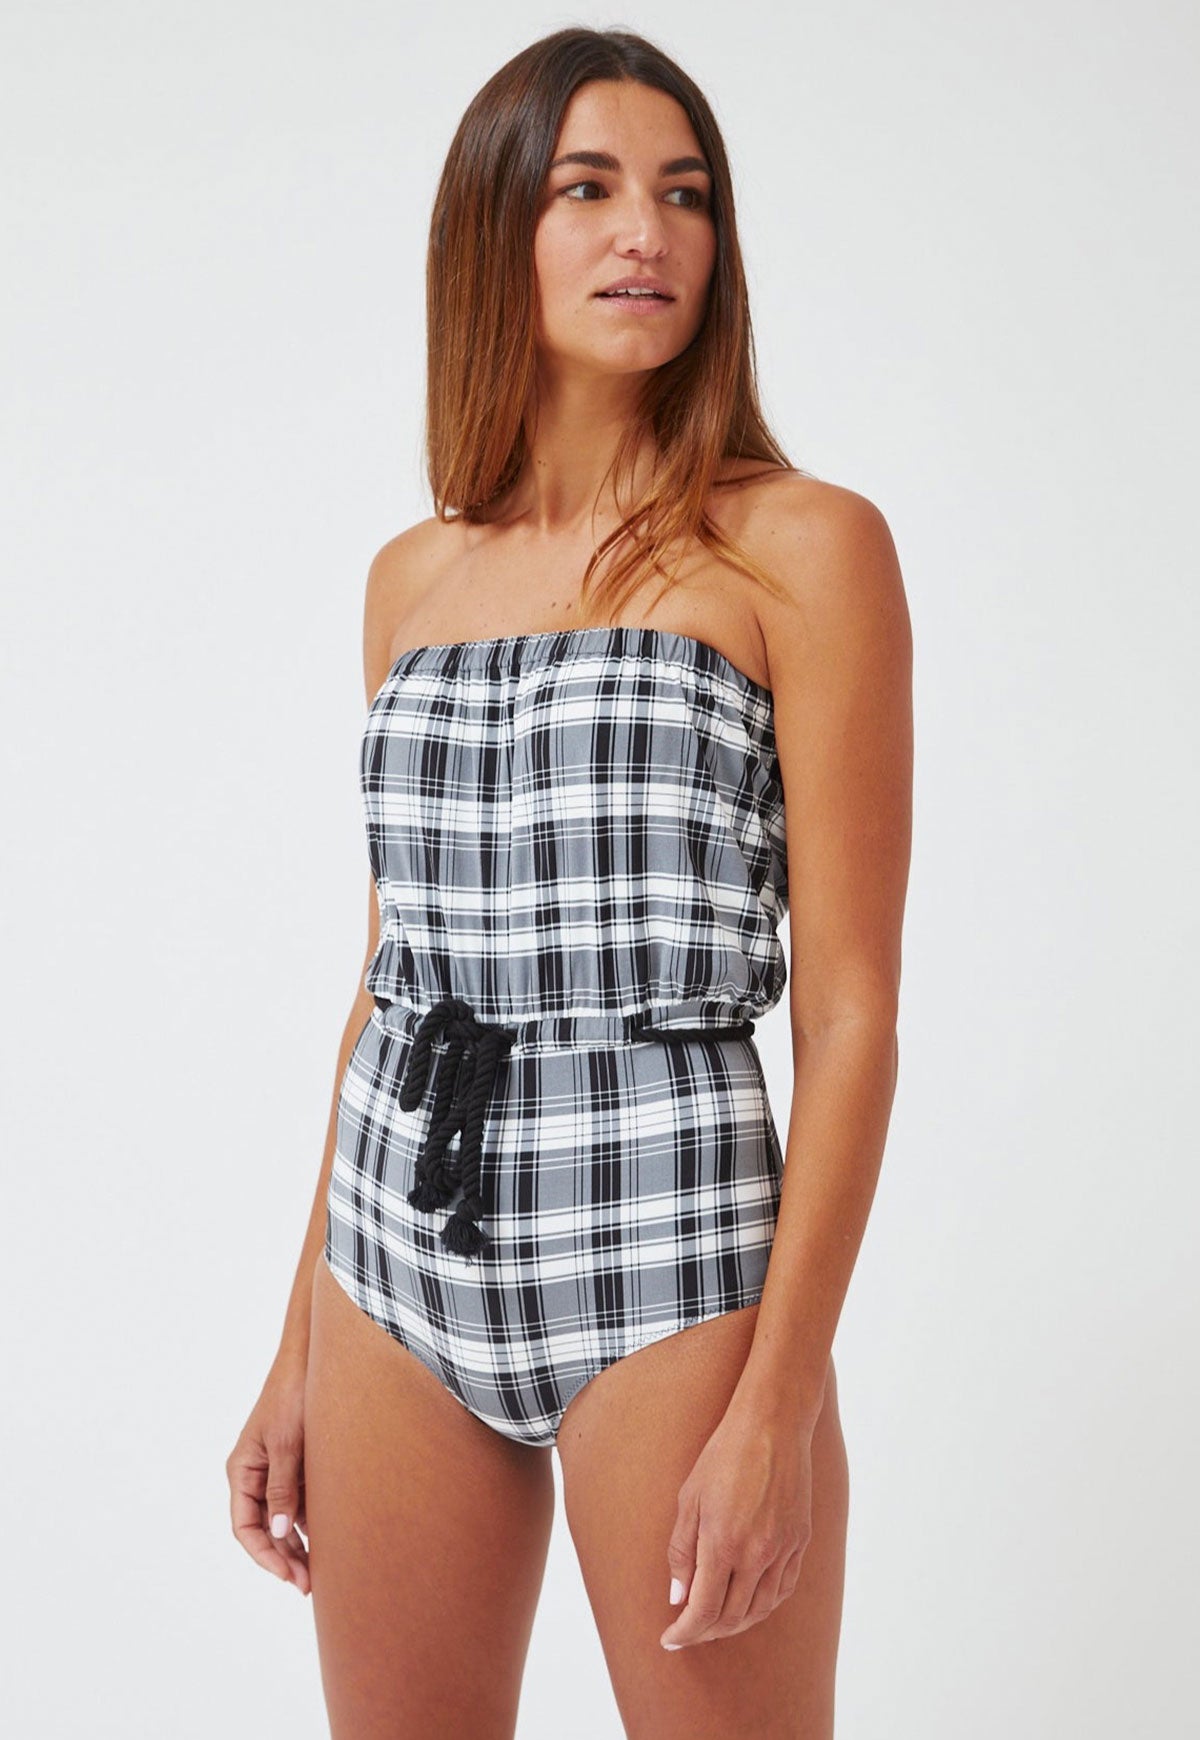 THE VICTOR DRAWSTRING MAILLOT in MADRAS PLAID